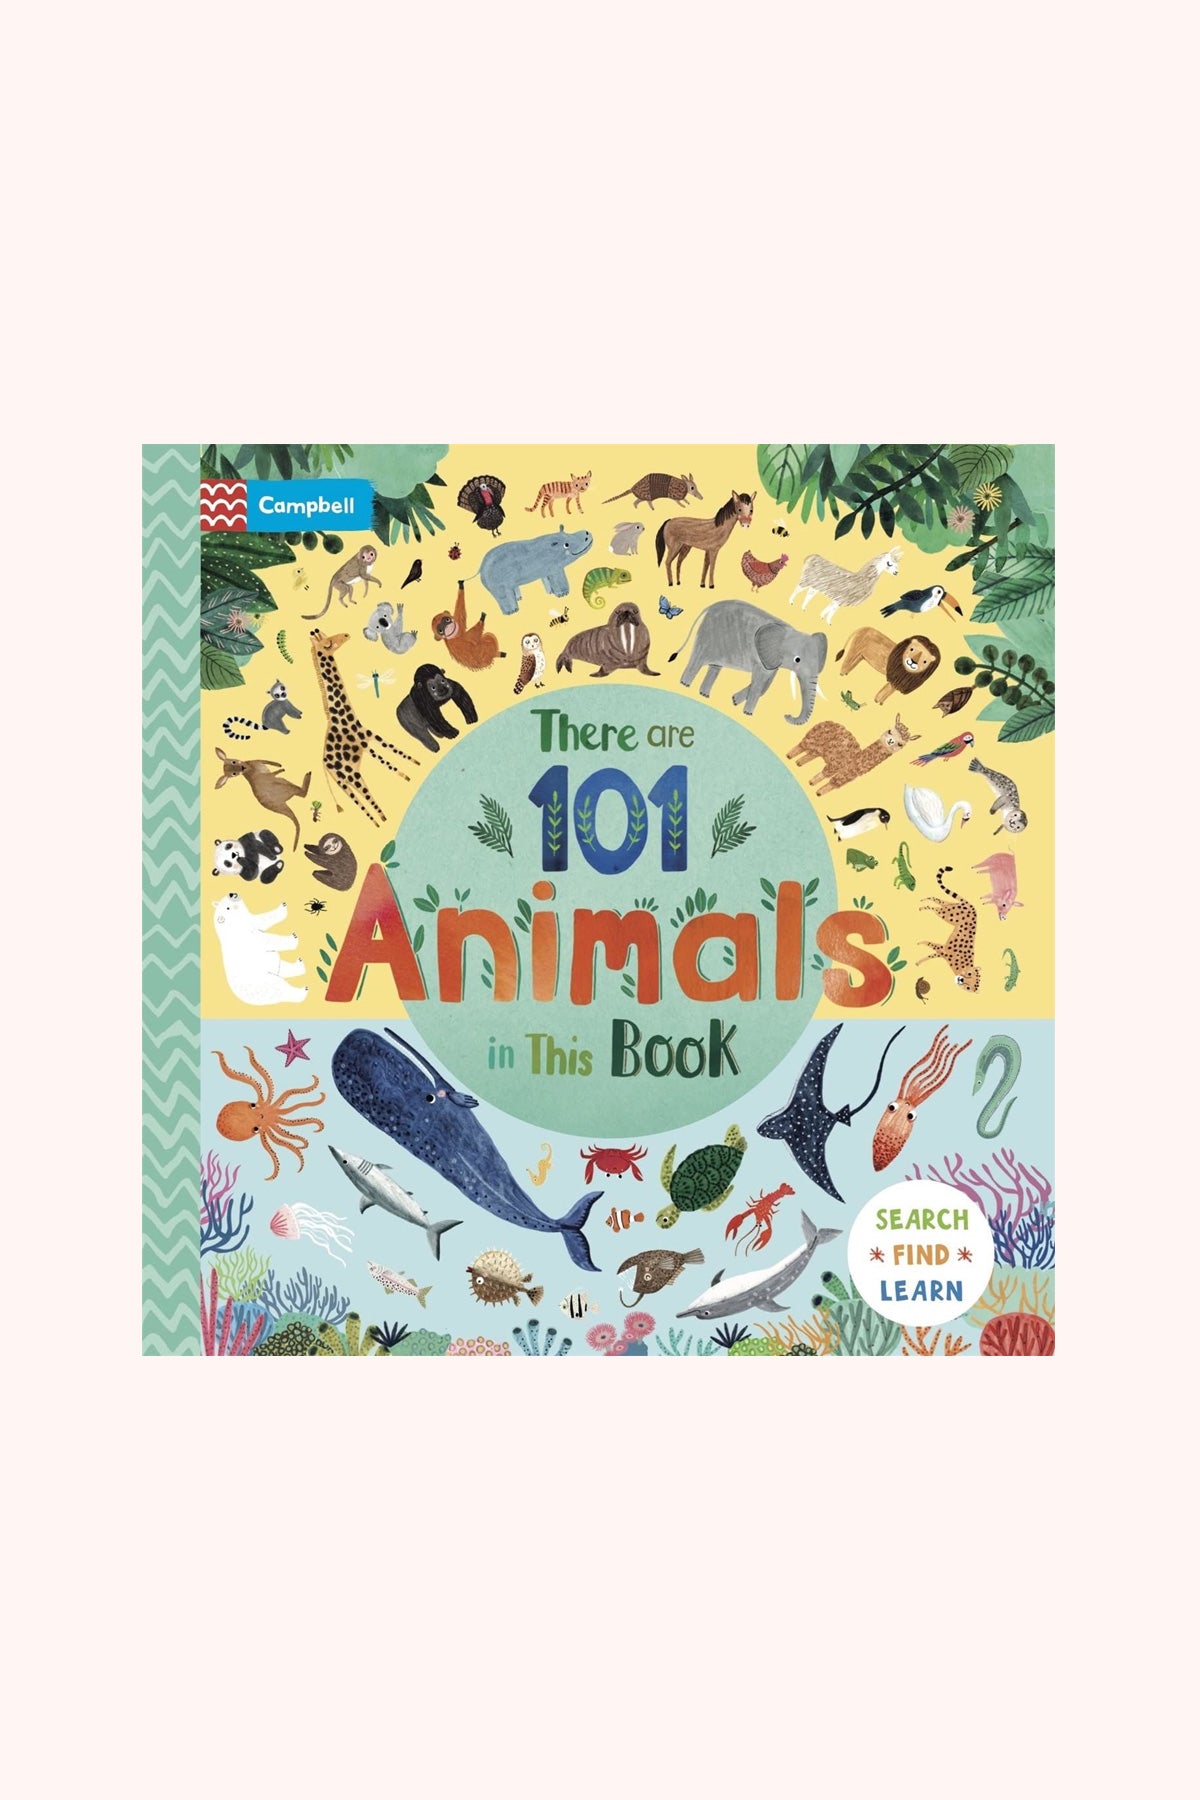 There are 101 Animals in This Book